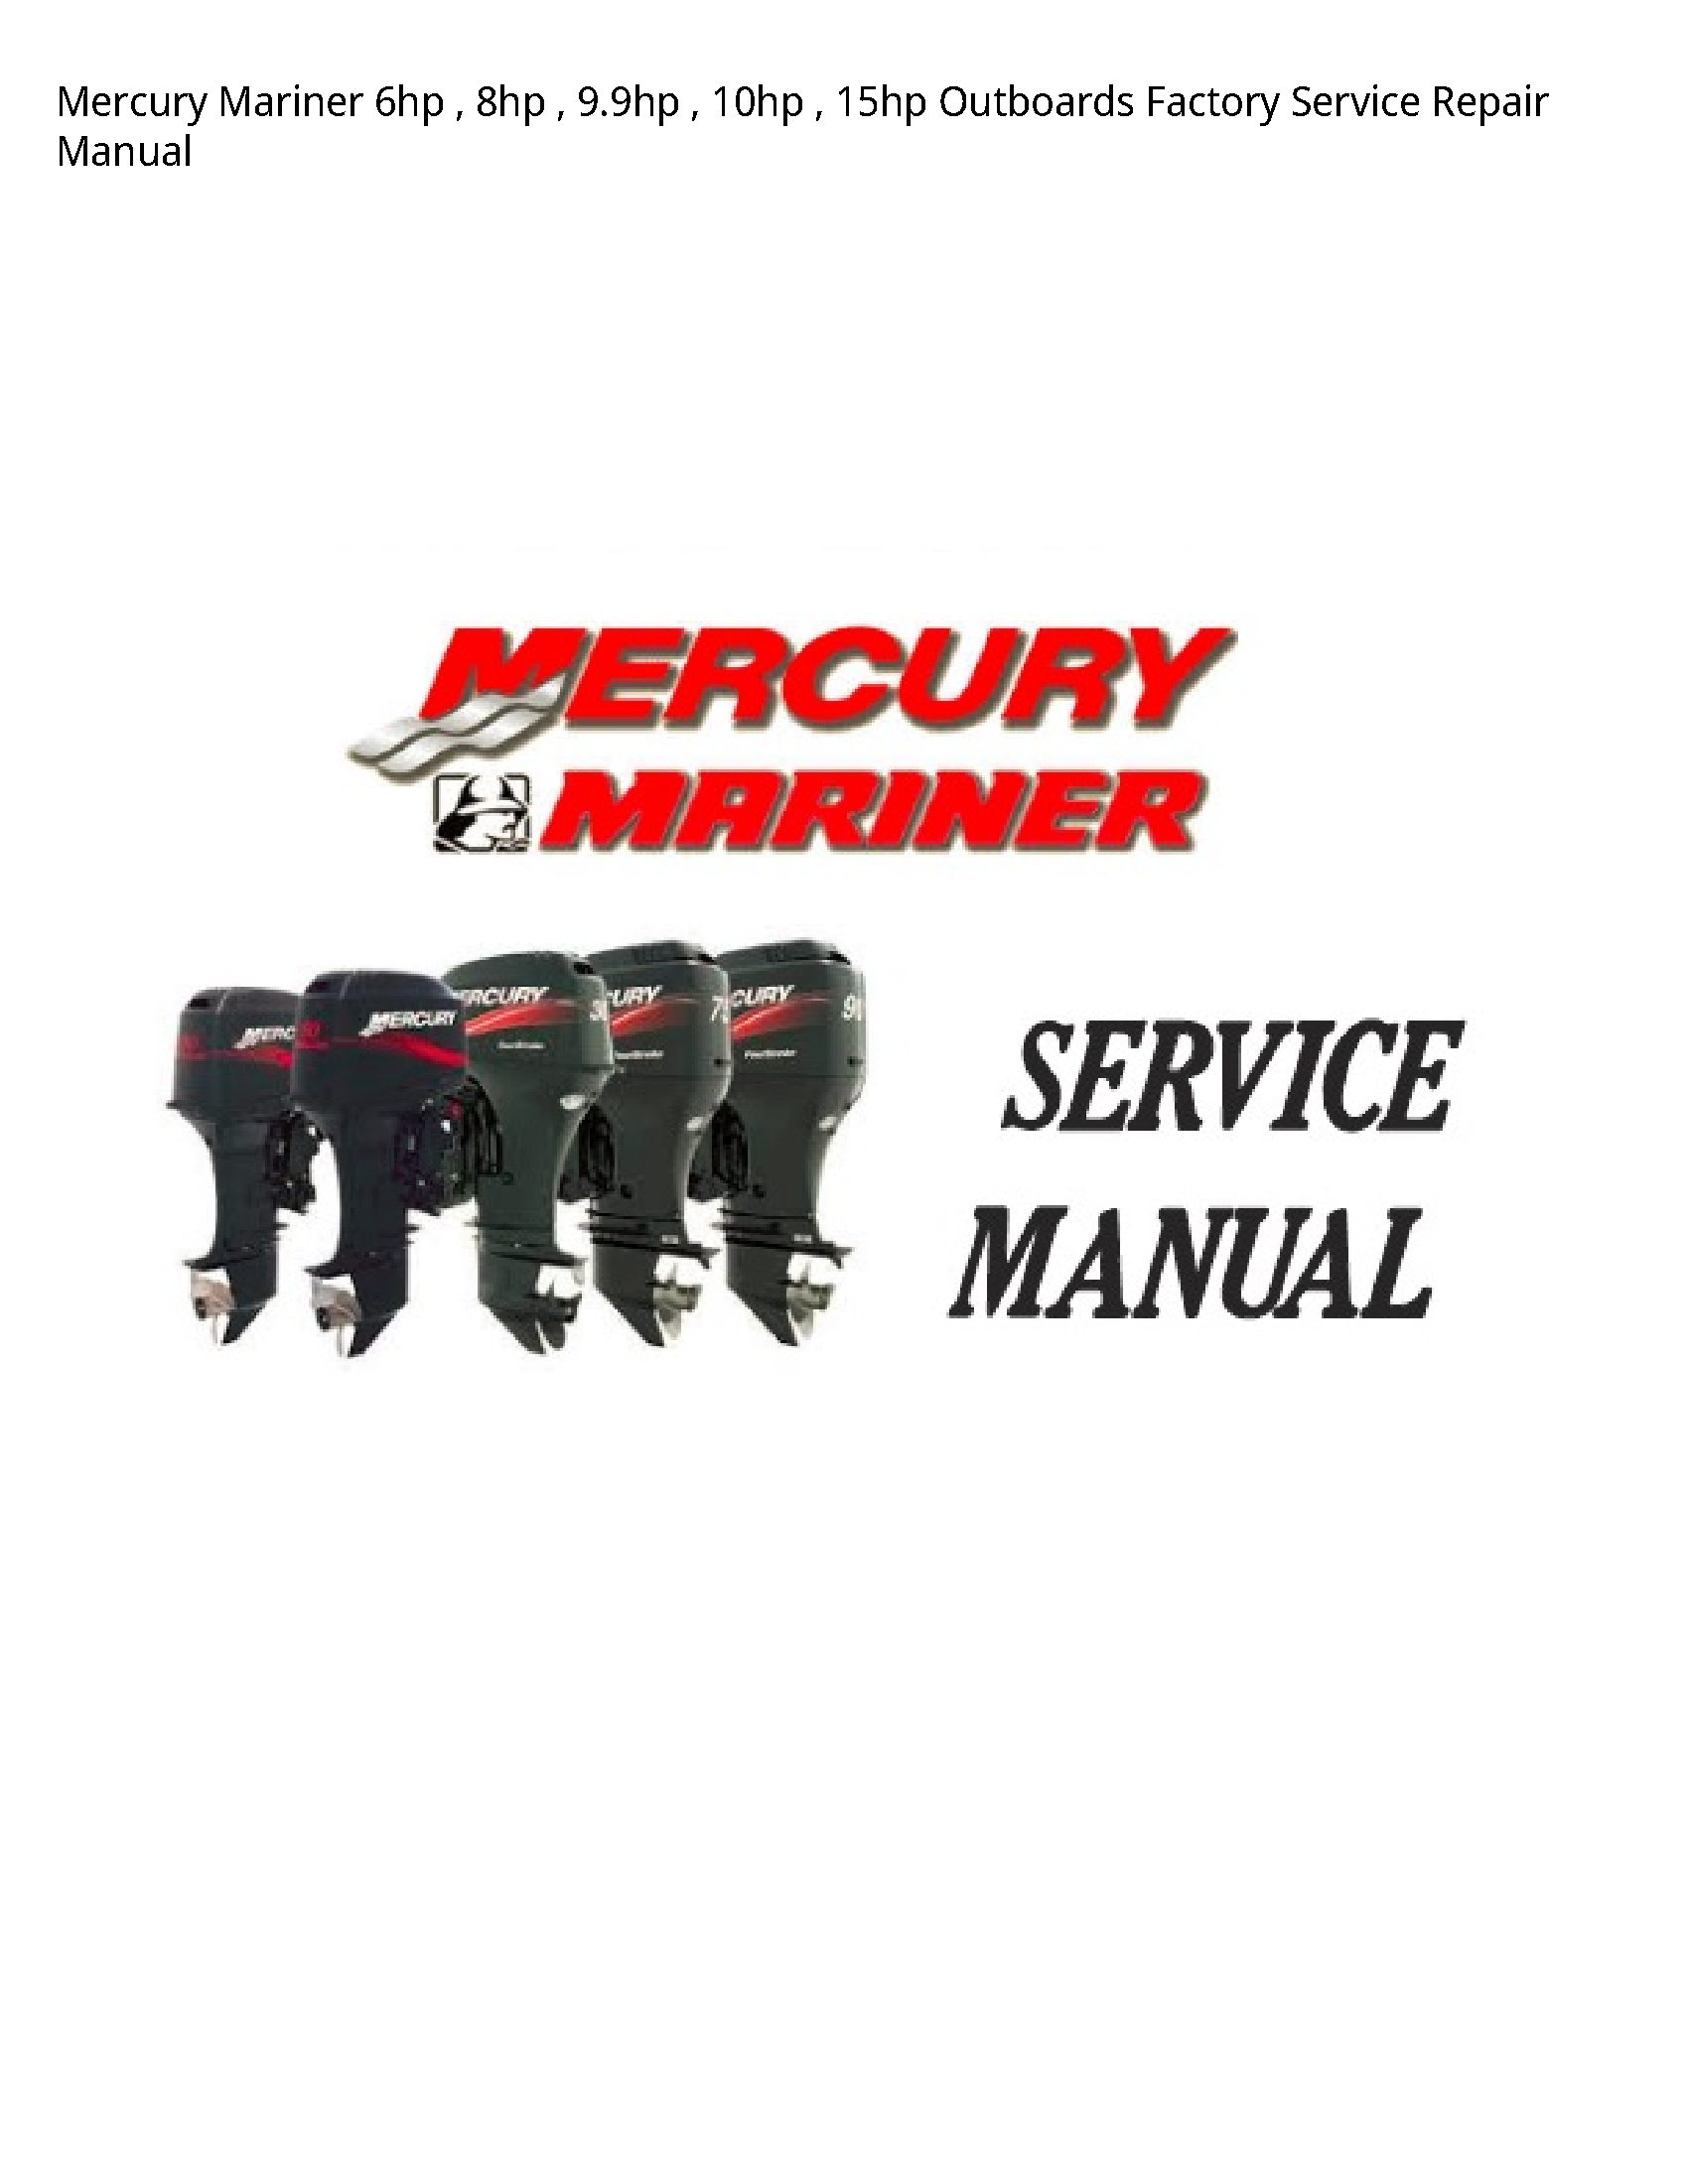 Mercury Mariner 6hp Outboards Factory manual